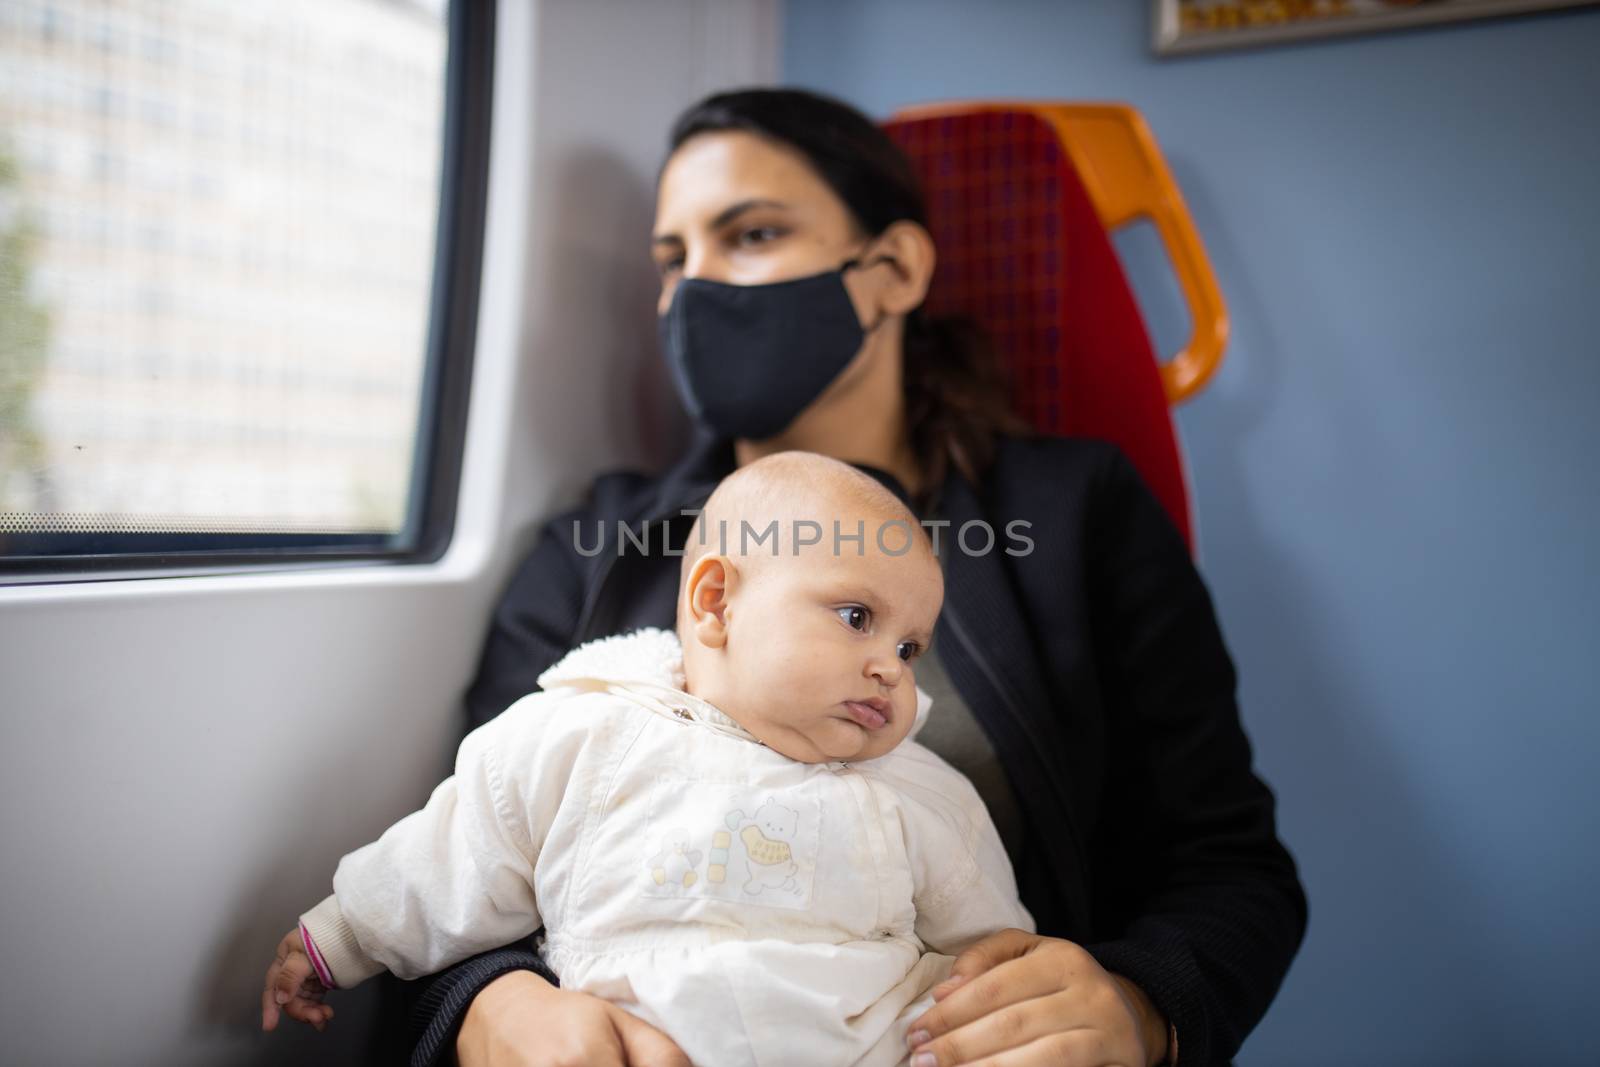 Woman wearing a black face mask sitting next to a window on a train and holding her baby who looks absently